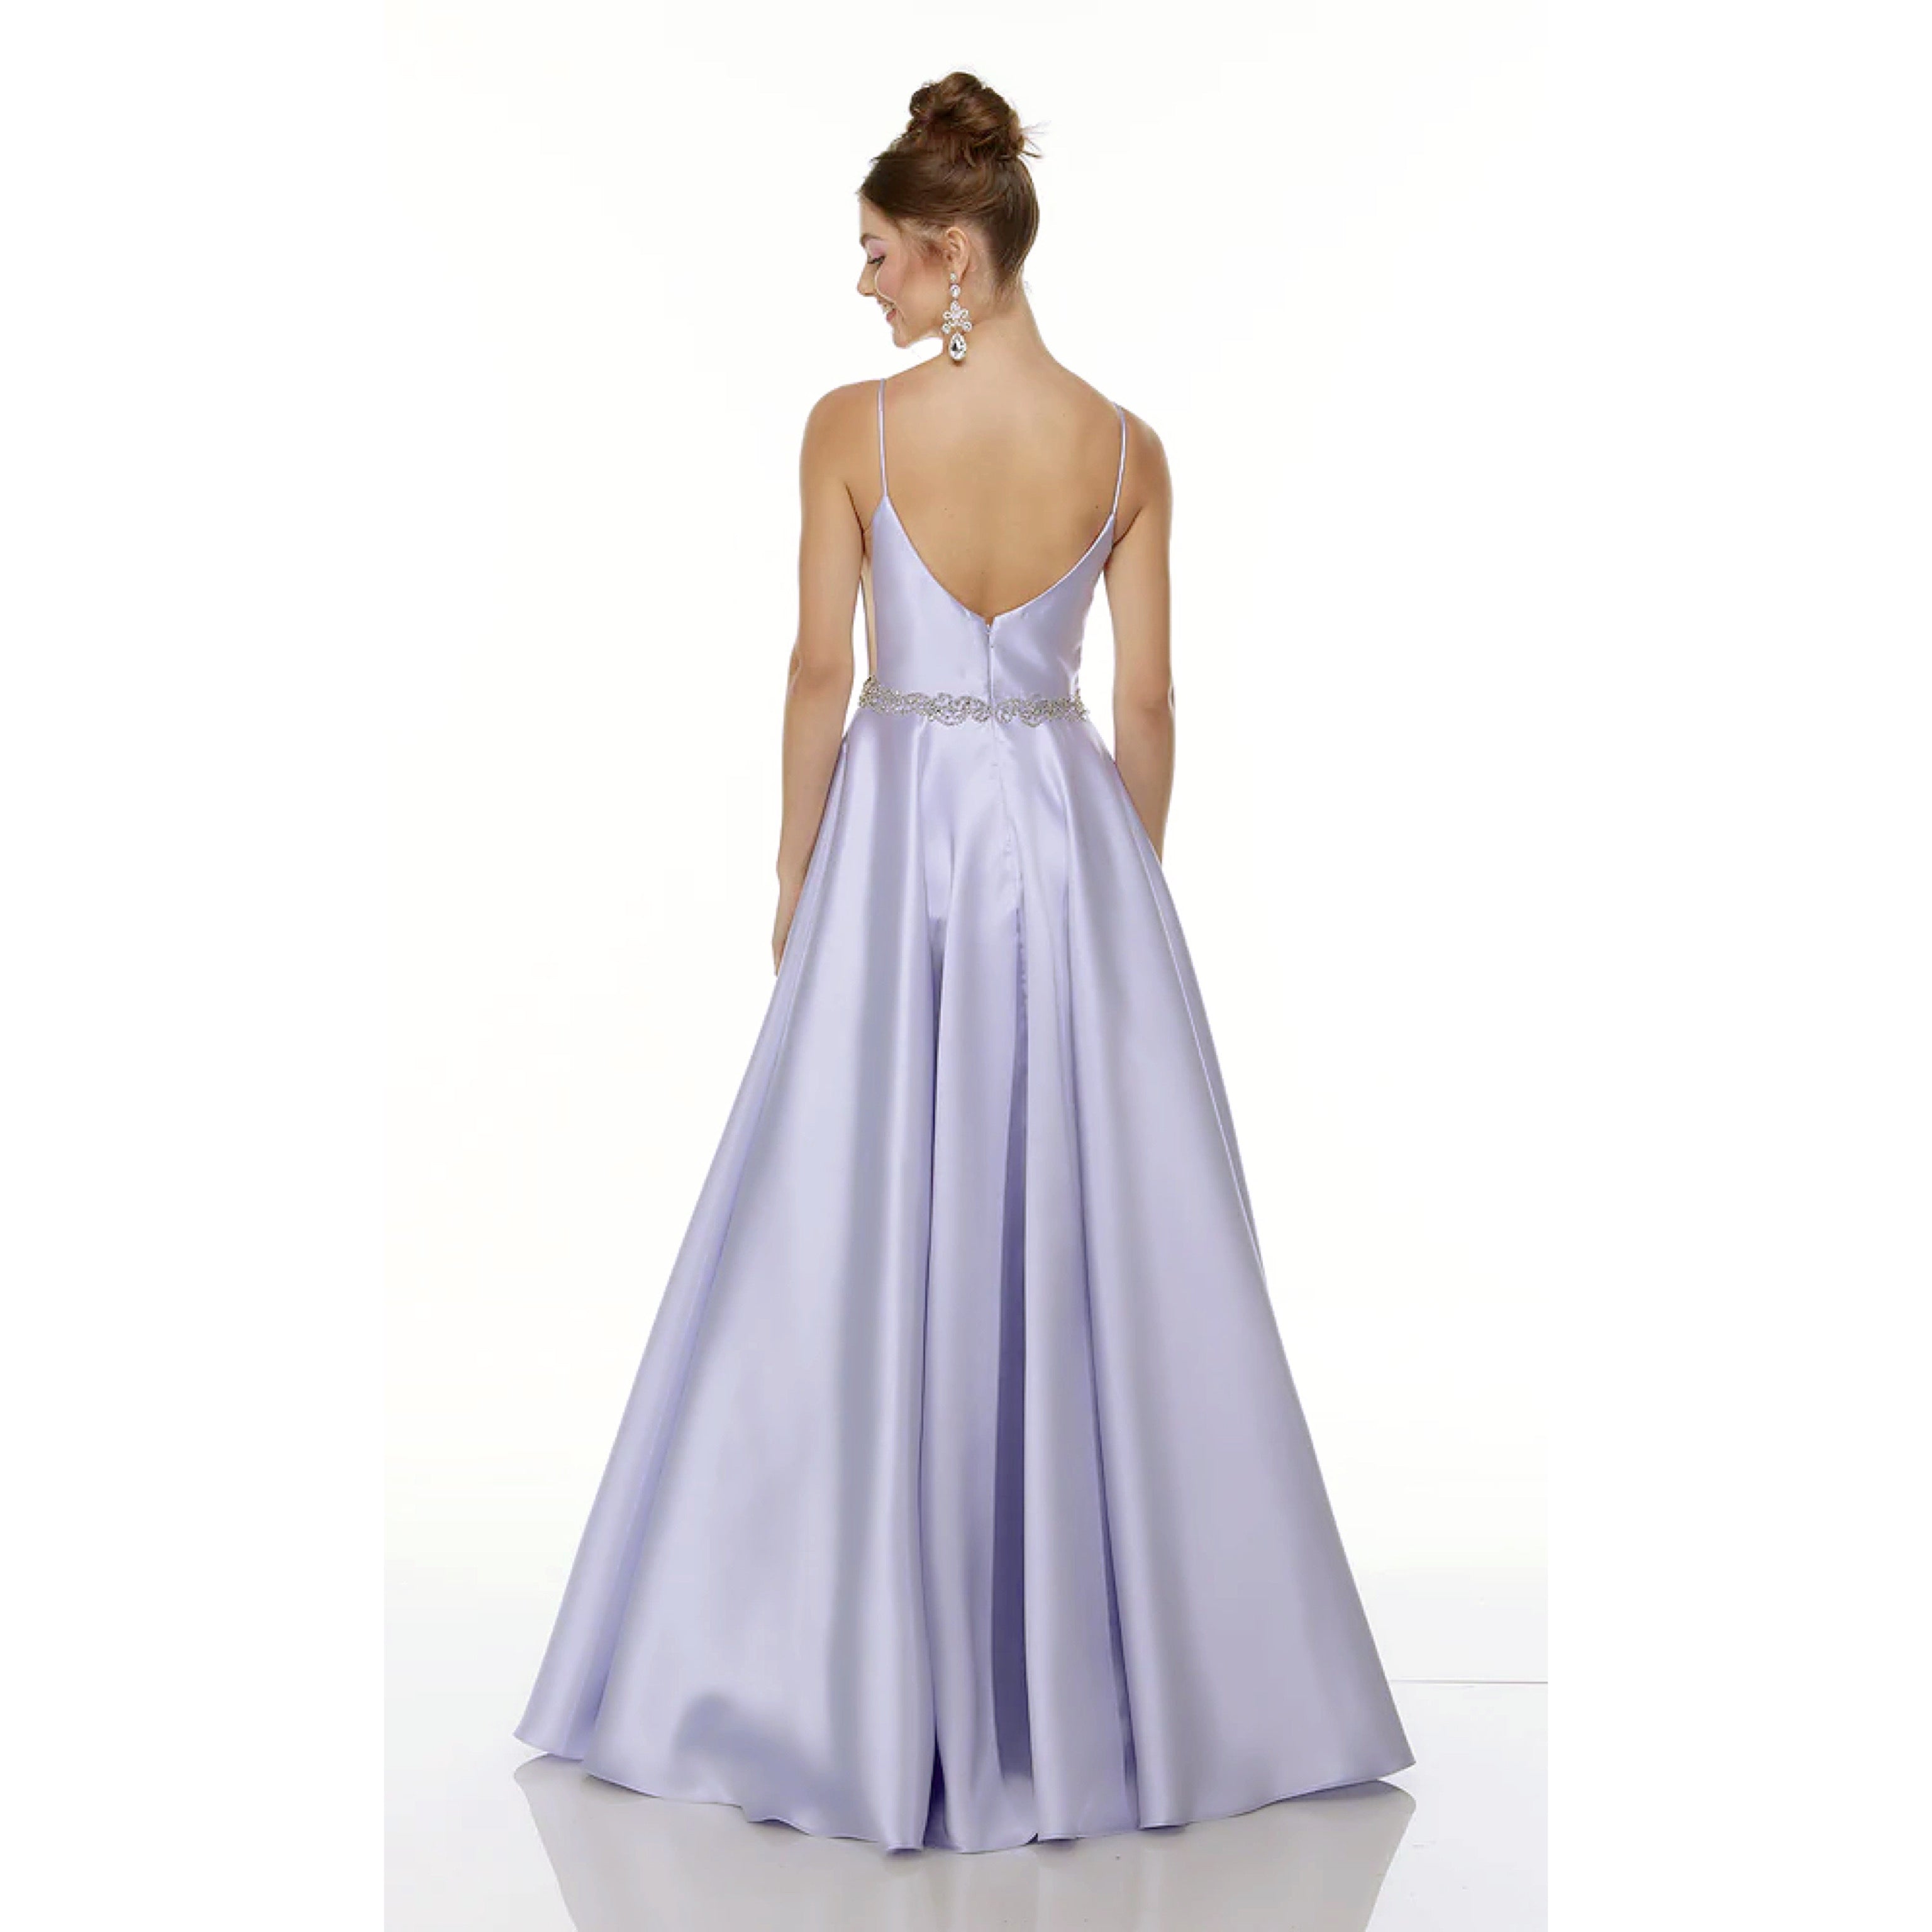 Alyce lavender ballgown, sizes 14 & 16, NEW WITH TAGS!